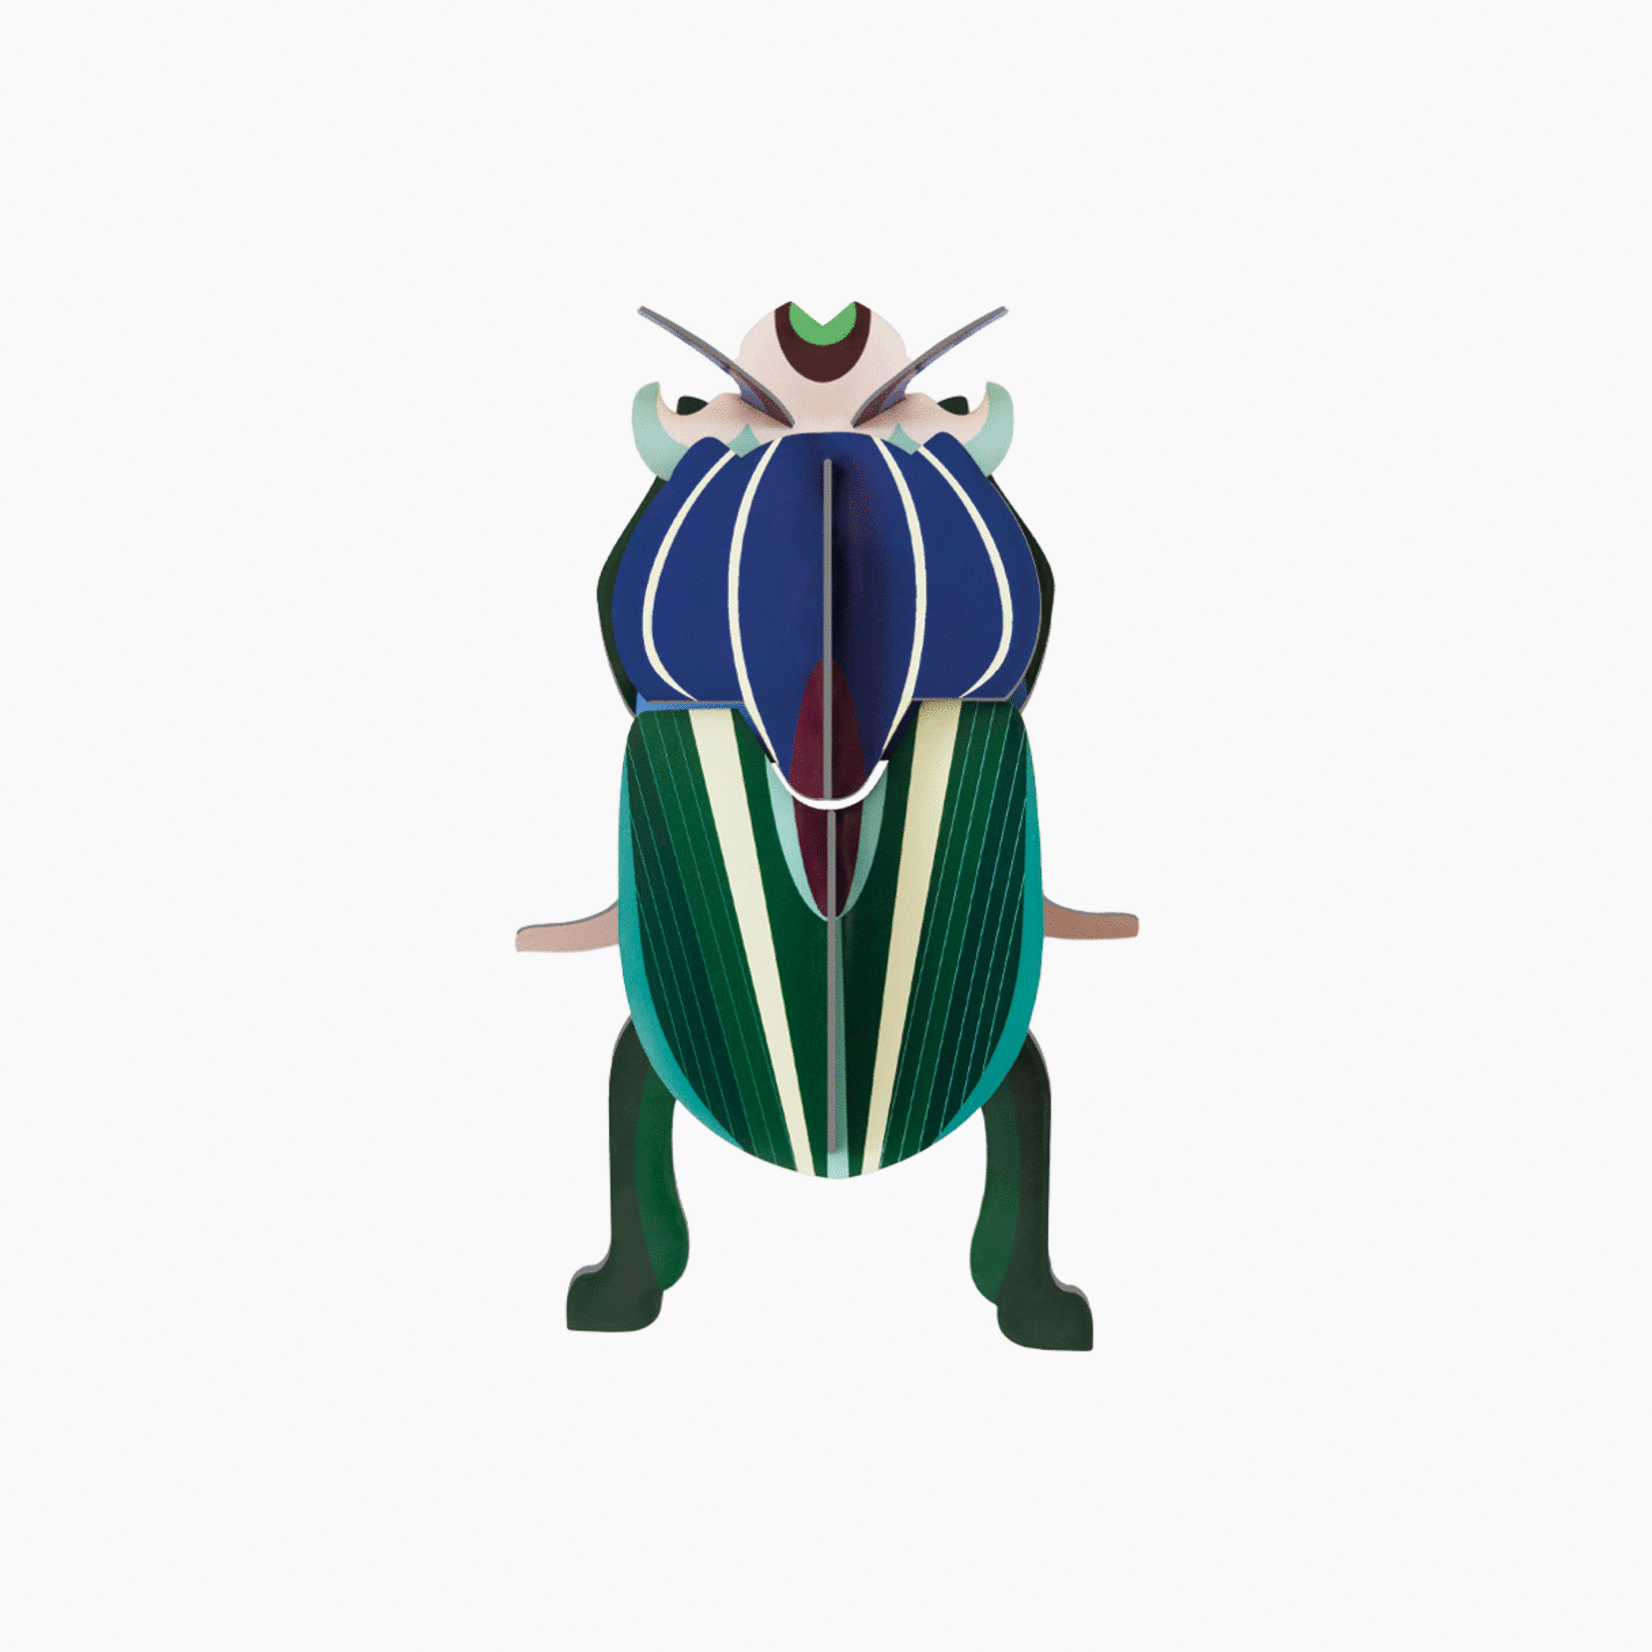 Studio Roof Studio Roof Small Insects - Mimela Scarab Beetle